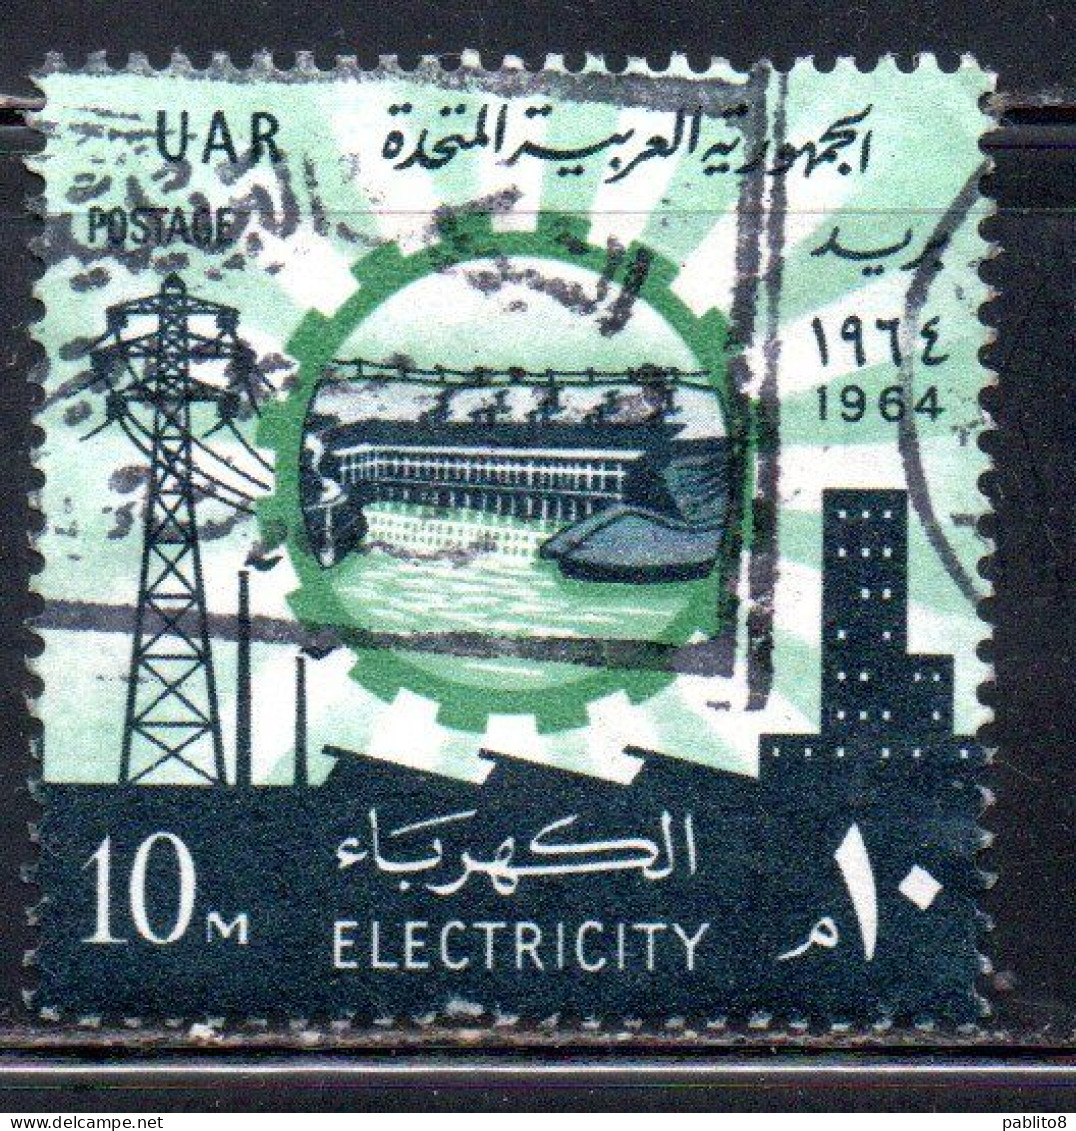 UAR EGYPT EGITTO 1964 ELECTRICITY ASWAN HIGH DAM HYDROELICTRIC POWER STATION LAND RECLAMATION 10m USED USATO - Usados